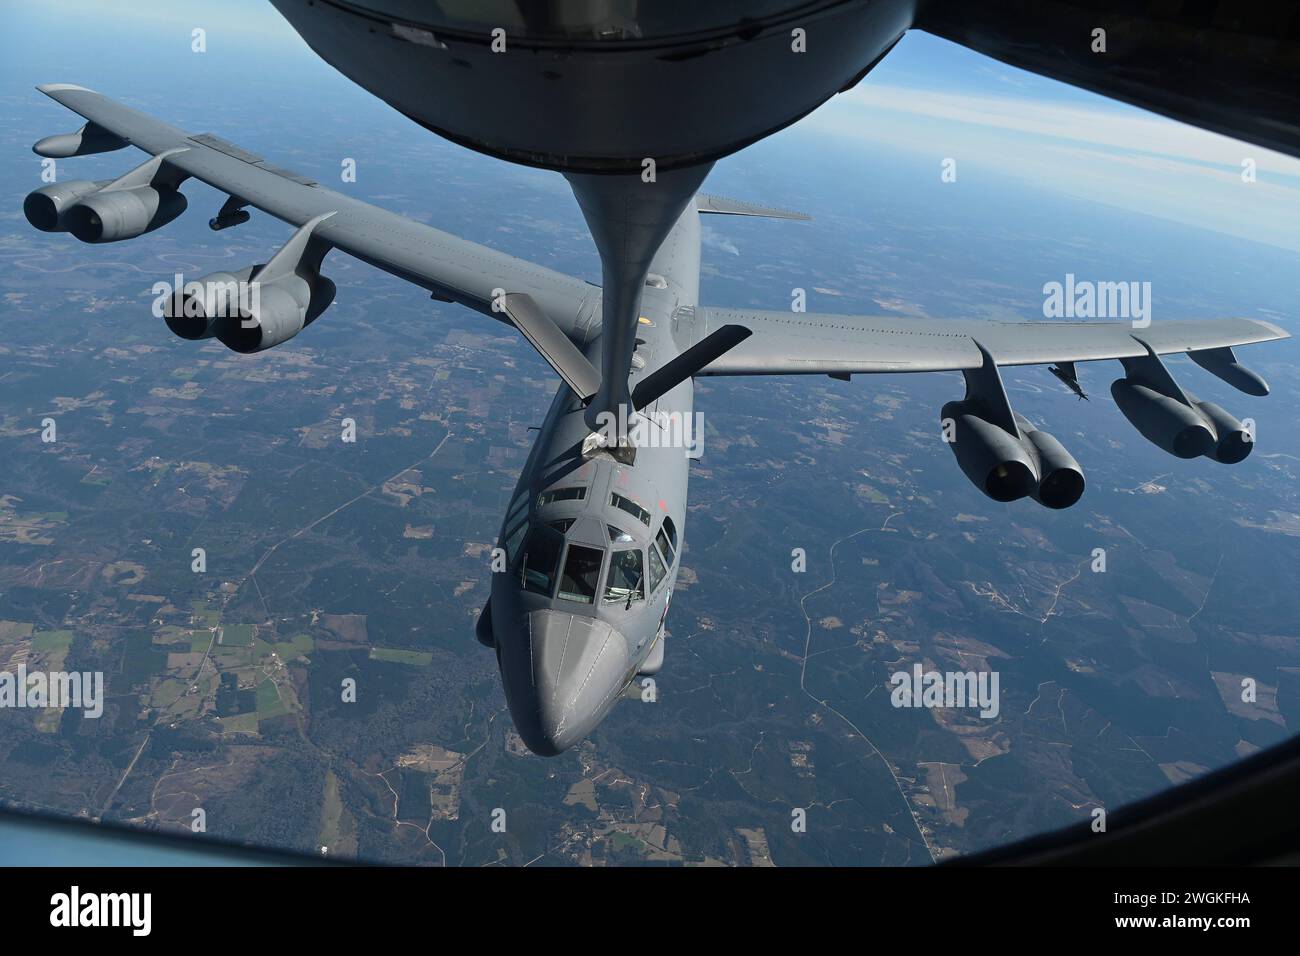 , United States. 30 January, 2024. A U.S. Air Force B-52 Stratofortress strategic bomber aircraft from the 11th Bomb Squadron, refuels from a KC-135 Stratotanker aircraft after refueling, January 30, 2024 over the Southern United States. Credit: SrA Jessica Do/US Air Force/Alamy Live News Stock Photo